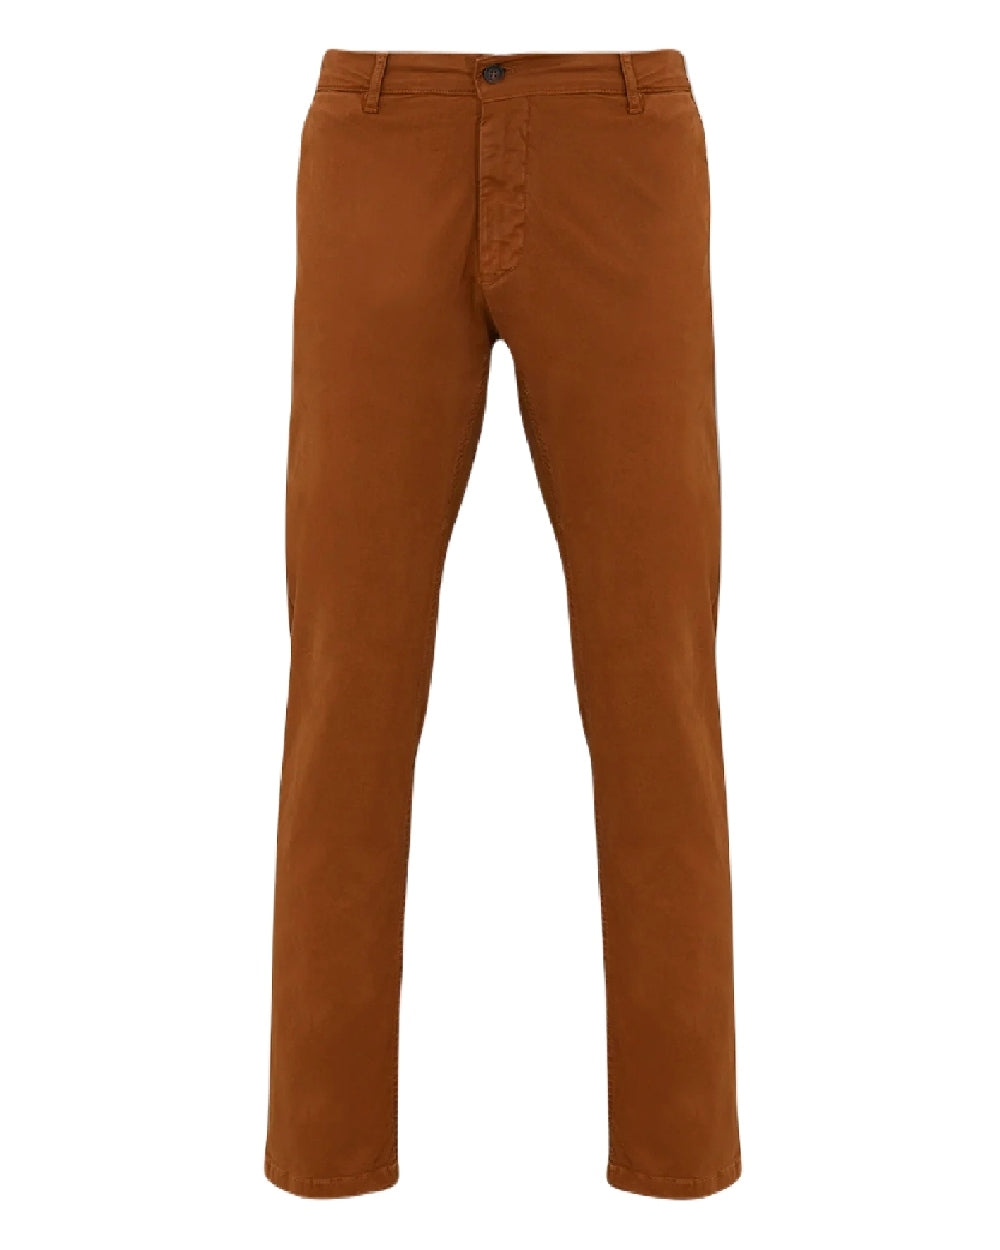 Alan Paine Bamforth Chino Trousers in Tobacco 